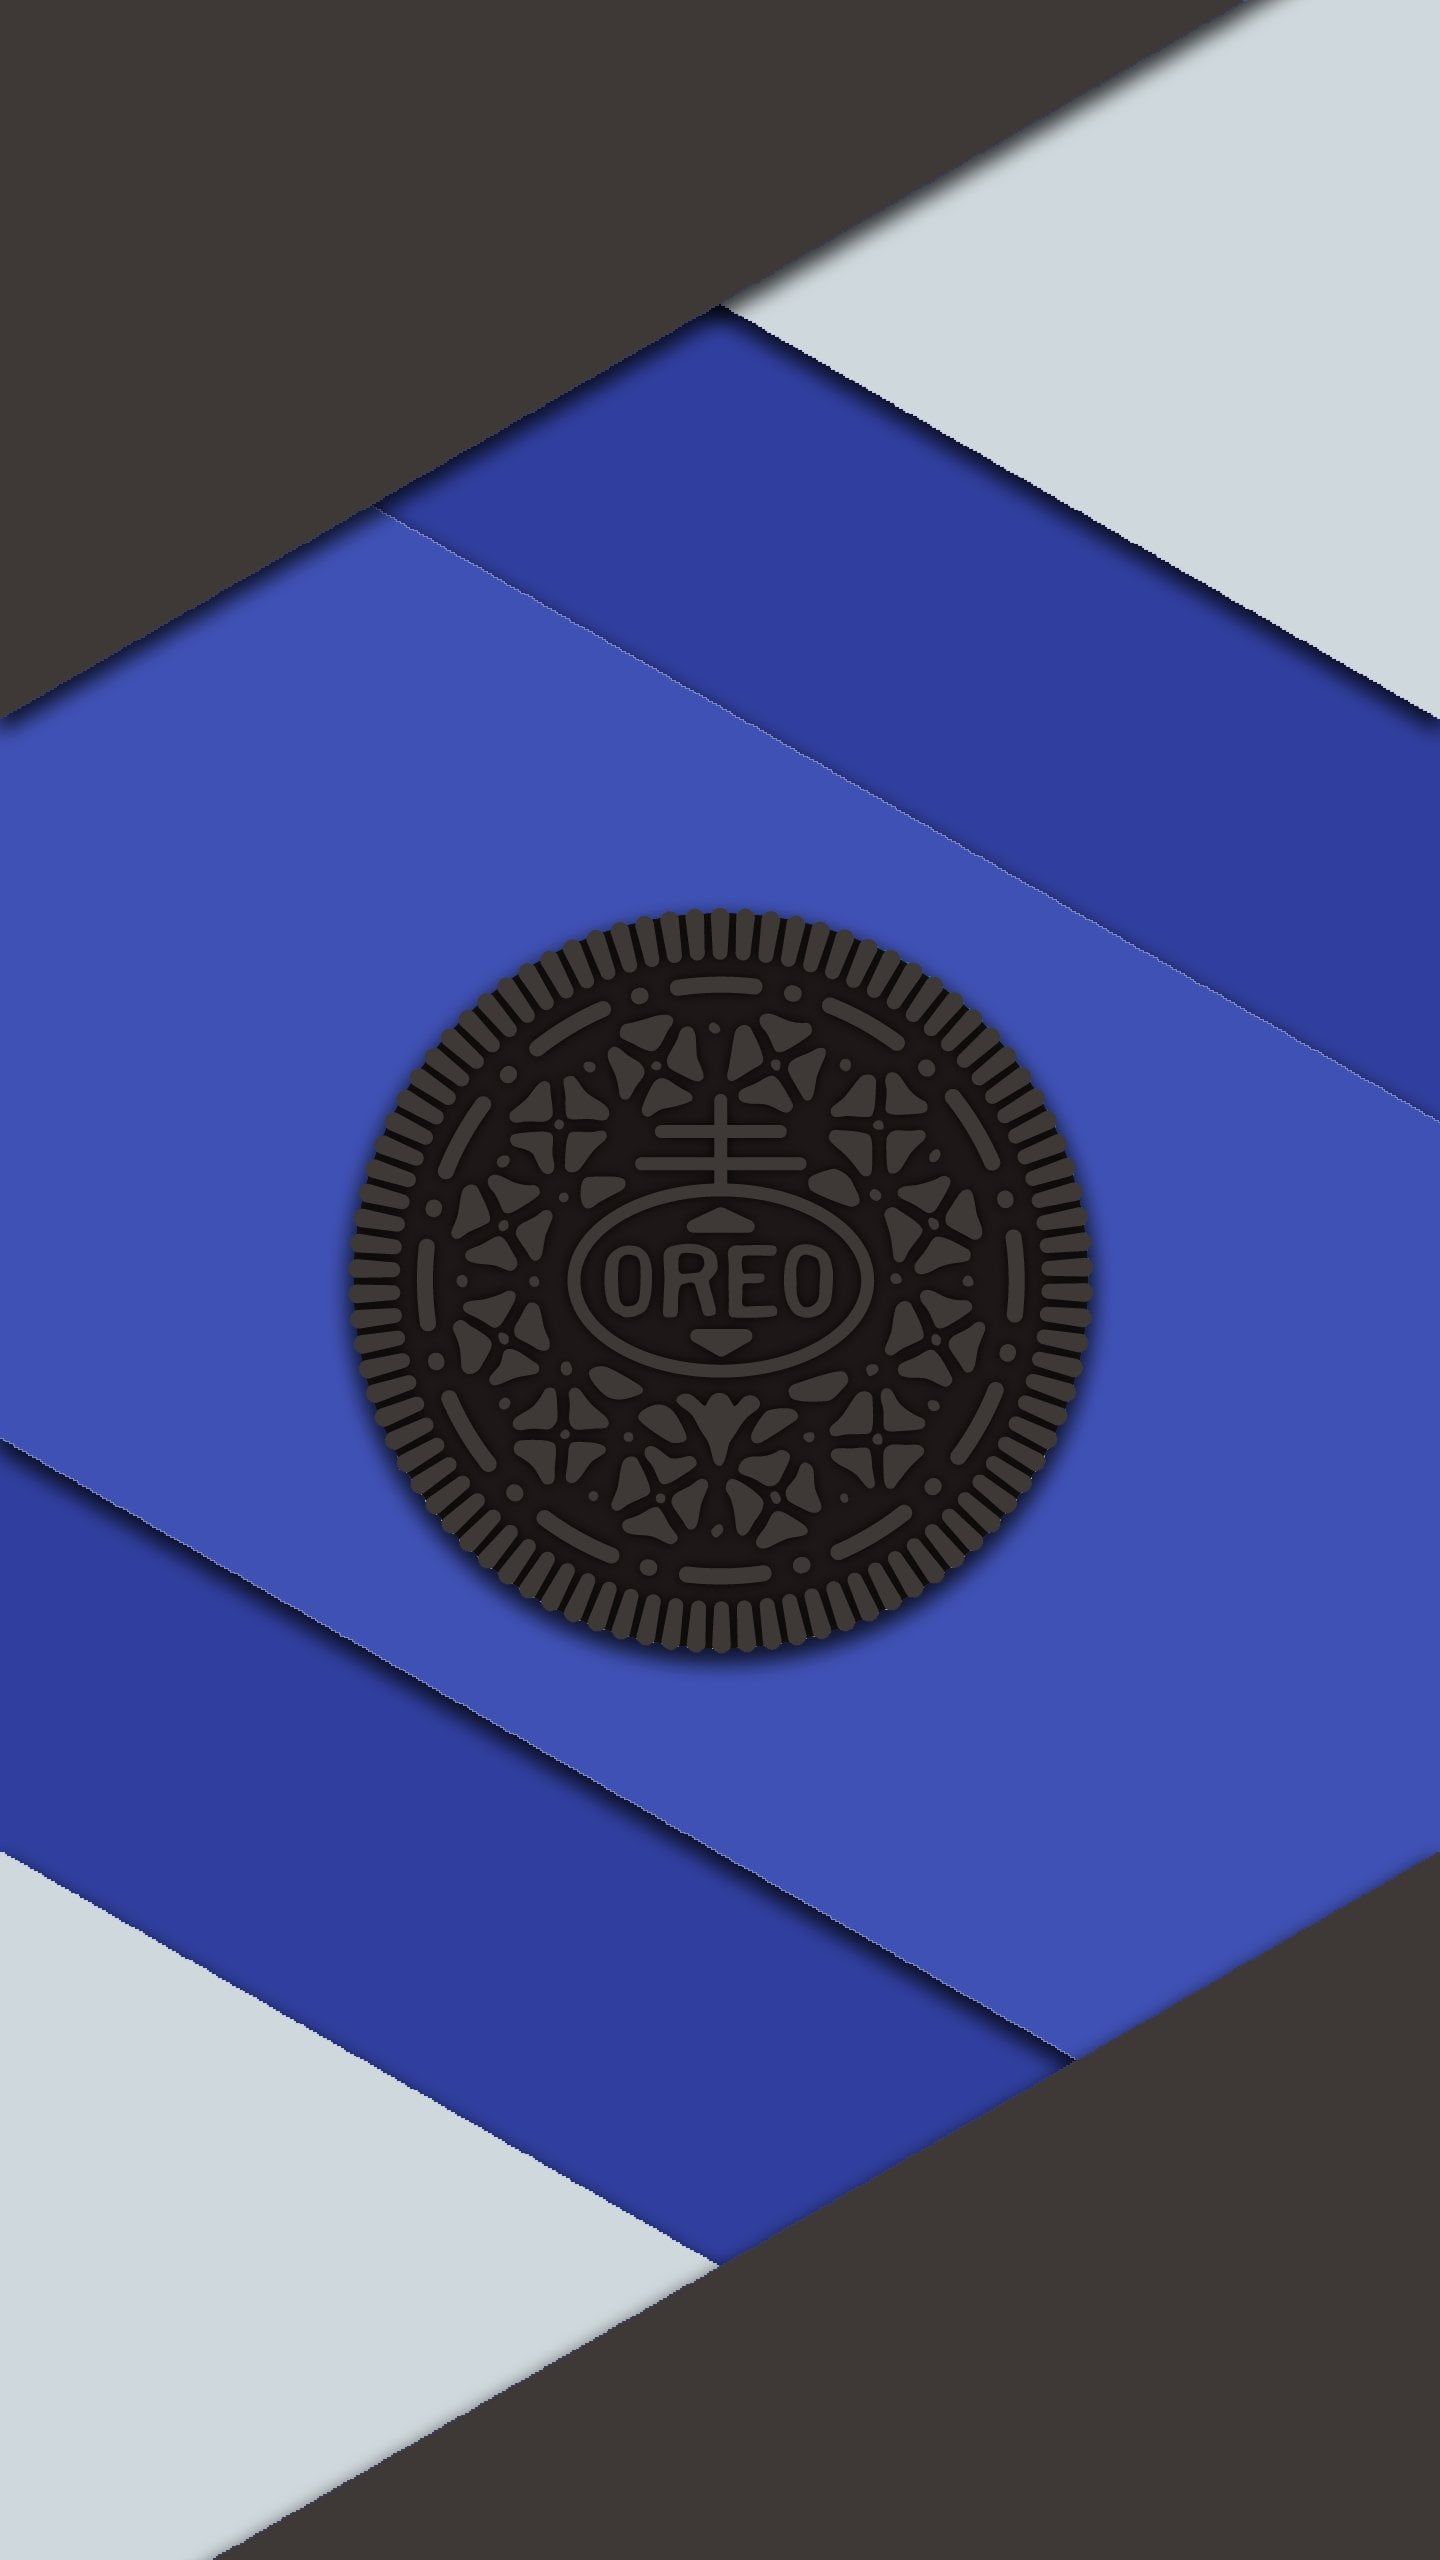 A photograph features a blue background with a white and black striped pattern. The image showcases a large cookie, specifically an Oreo, placed in - Oreo